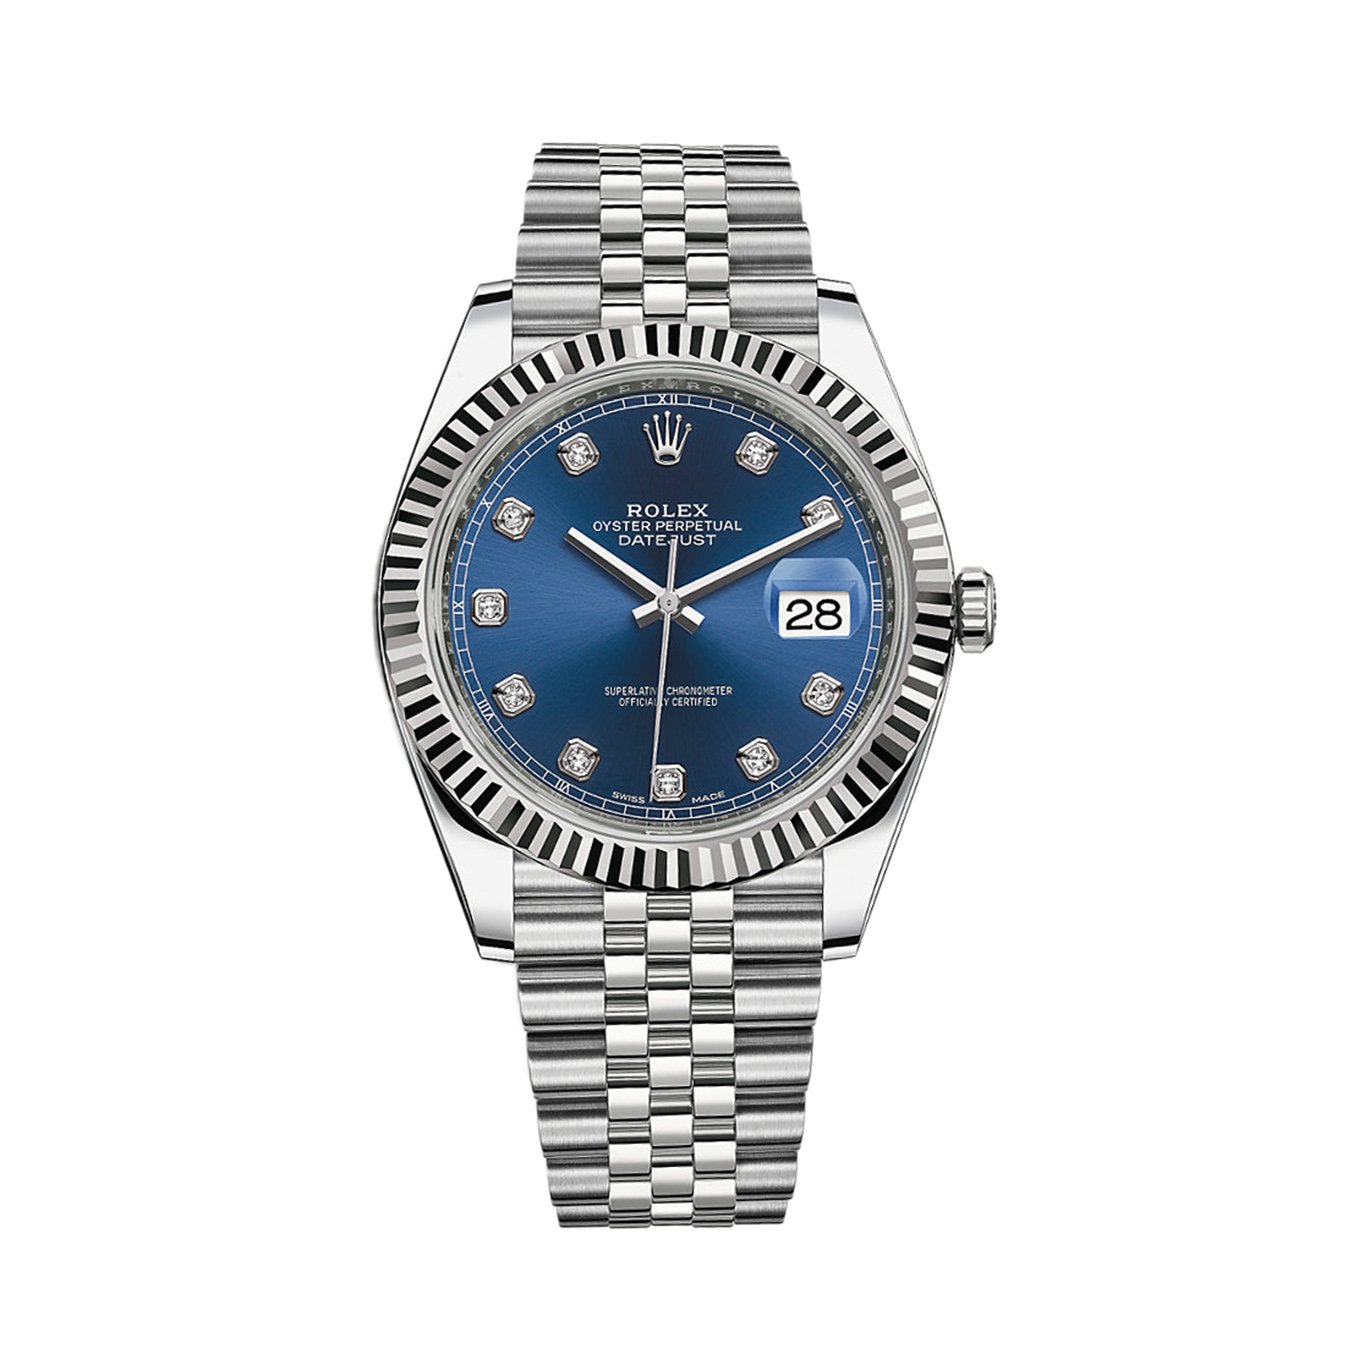 Datejust 41 126334 White Gold & Stainless Steel Watch (Blue Set with Diamonds)